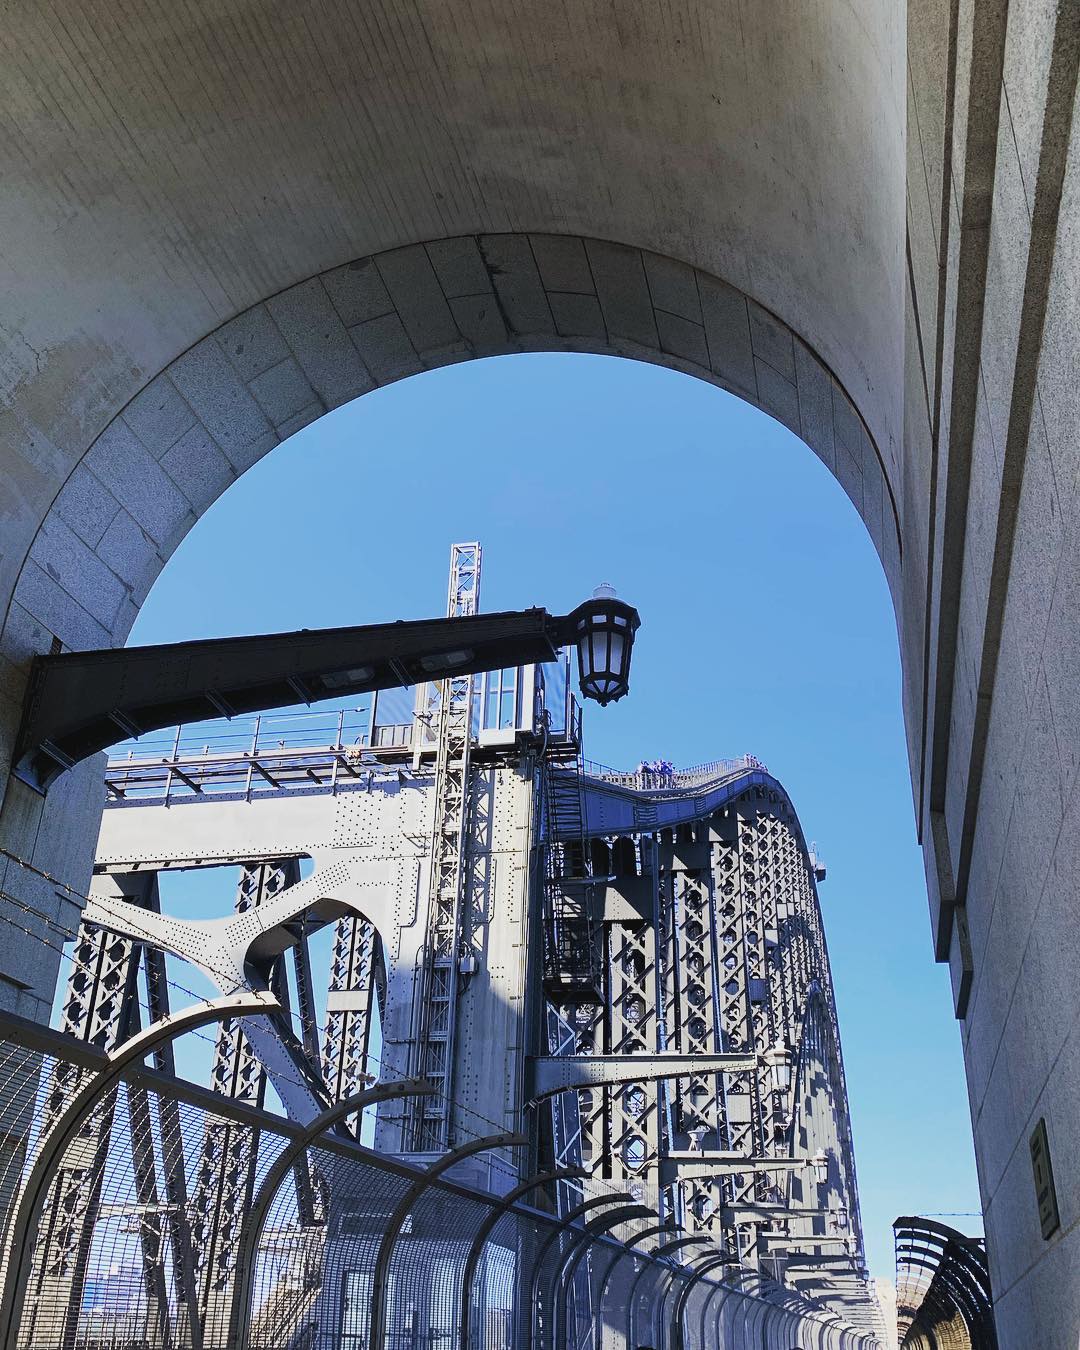 Lining up the curves....the arch of the heavy pylon of the Sydney Harbour Bridge (c. 1932) frames and contrasts with the lightness and delicacy of the curved steel bridge truss work...structural clarity at its best......